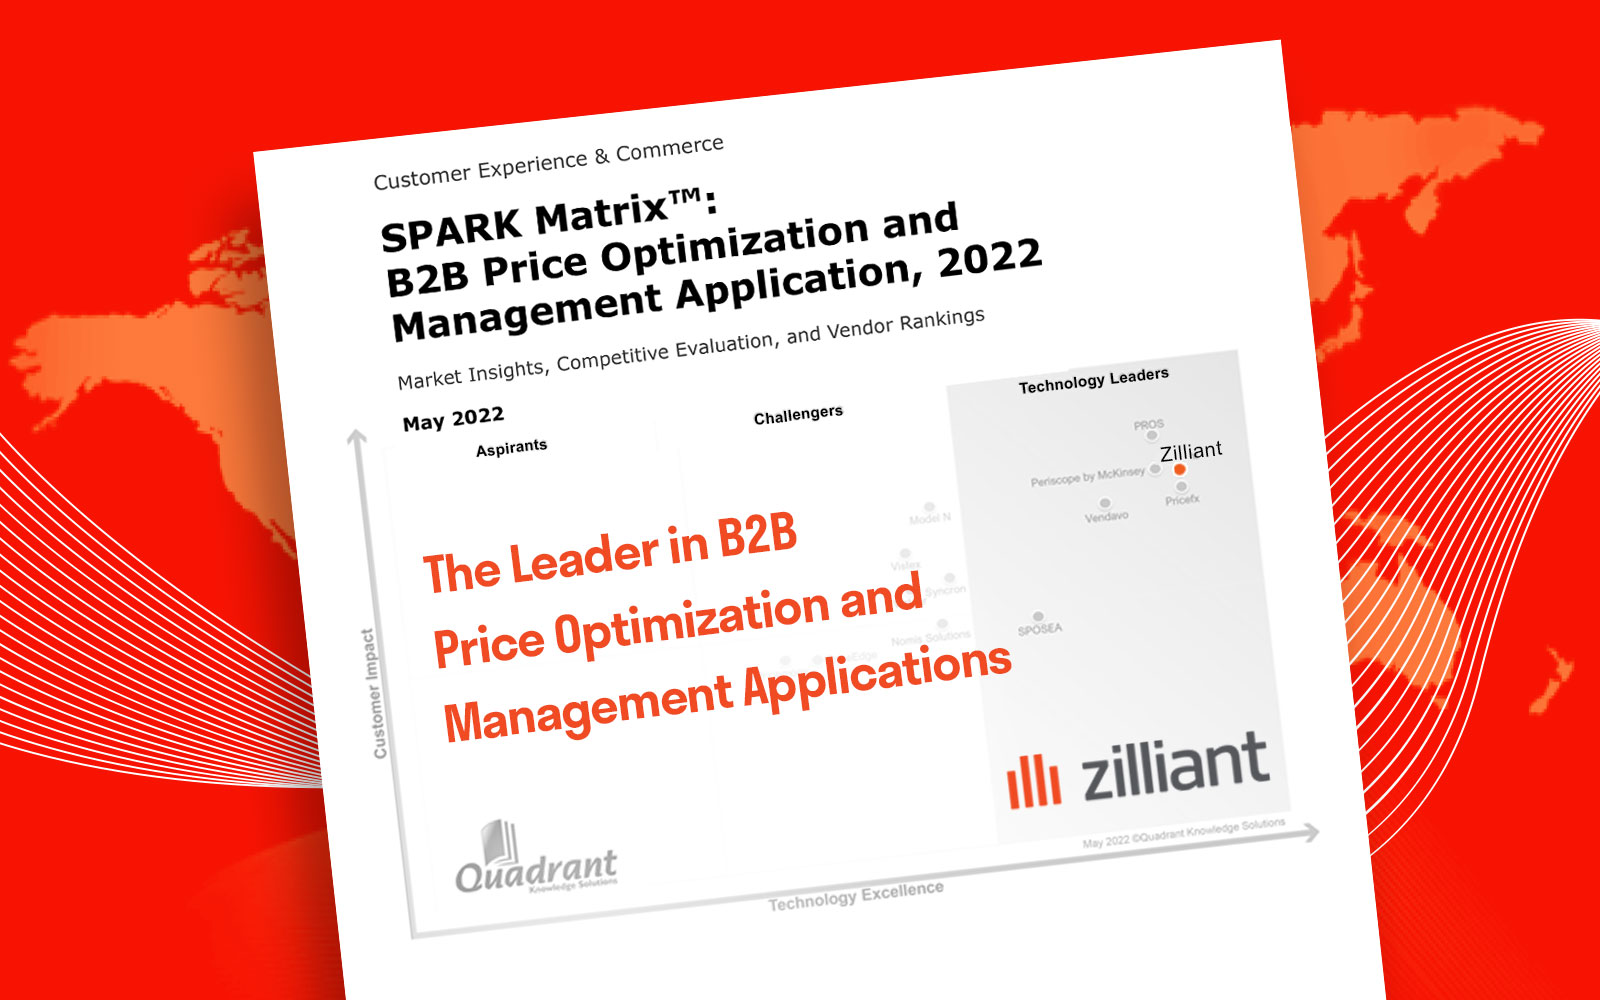 Zilliant Positioned as the Leader in the 2022 SPARK Matrix™ for B2B Price Optimization and Management Applications by Quadrant Knowledge Solutions